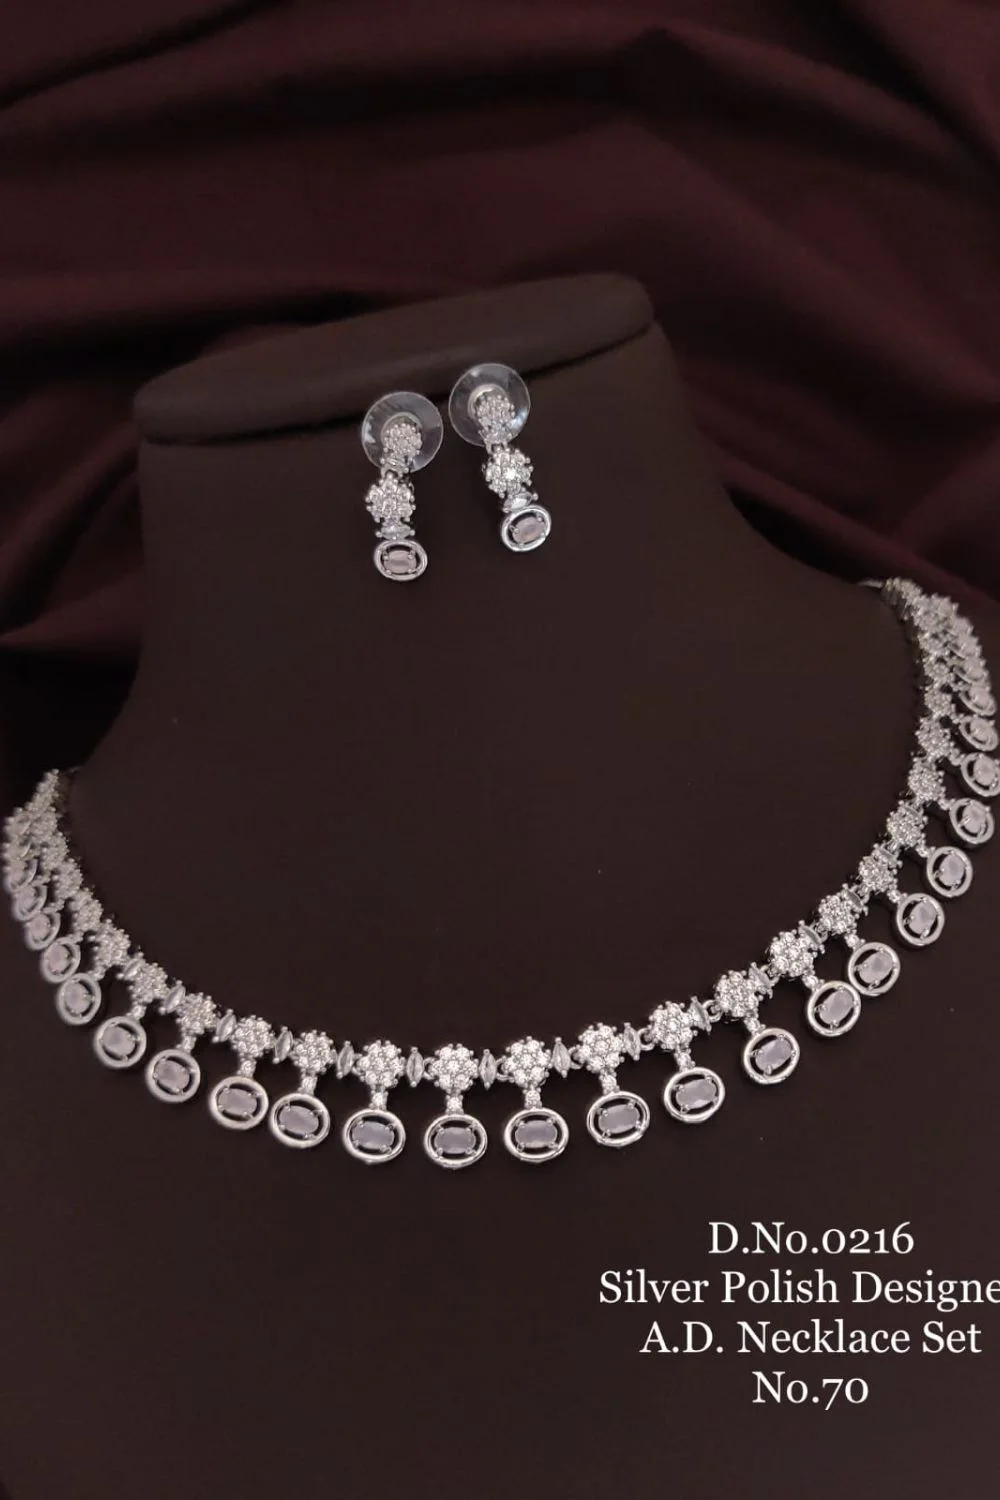 Classic Silver Polished AD Necklace